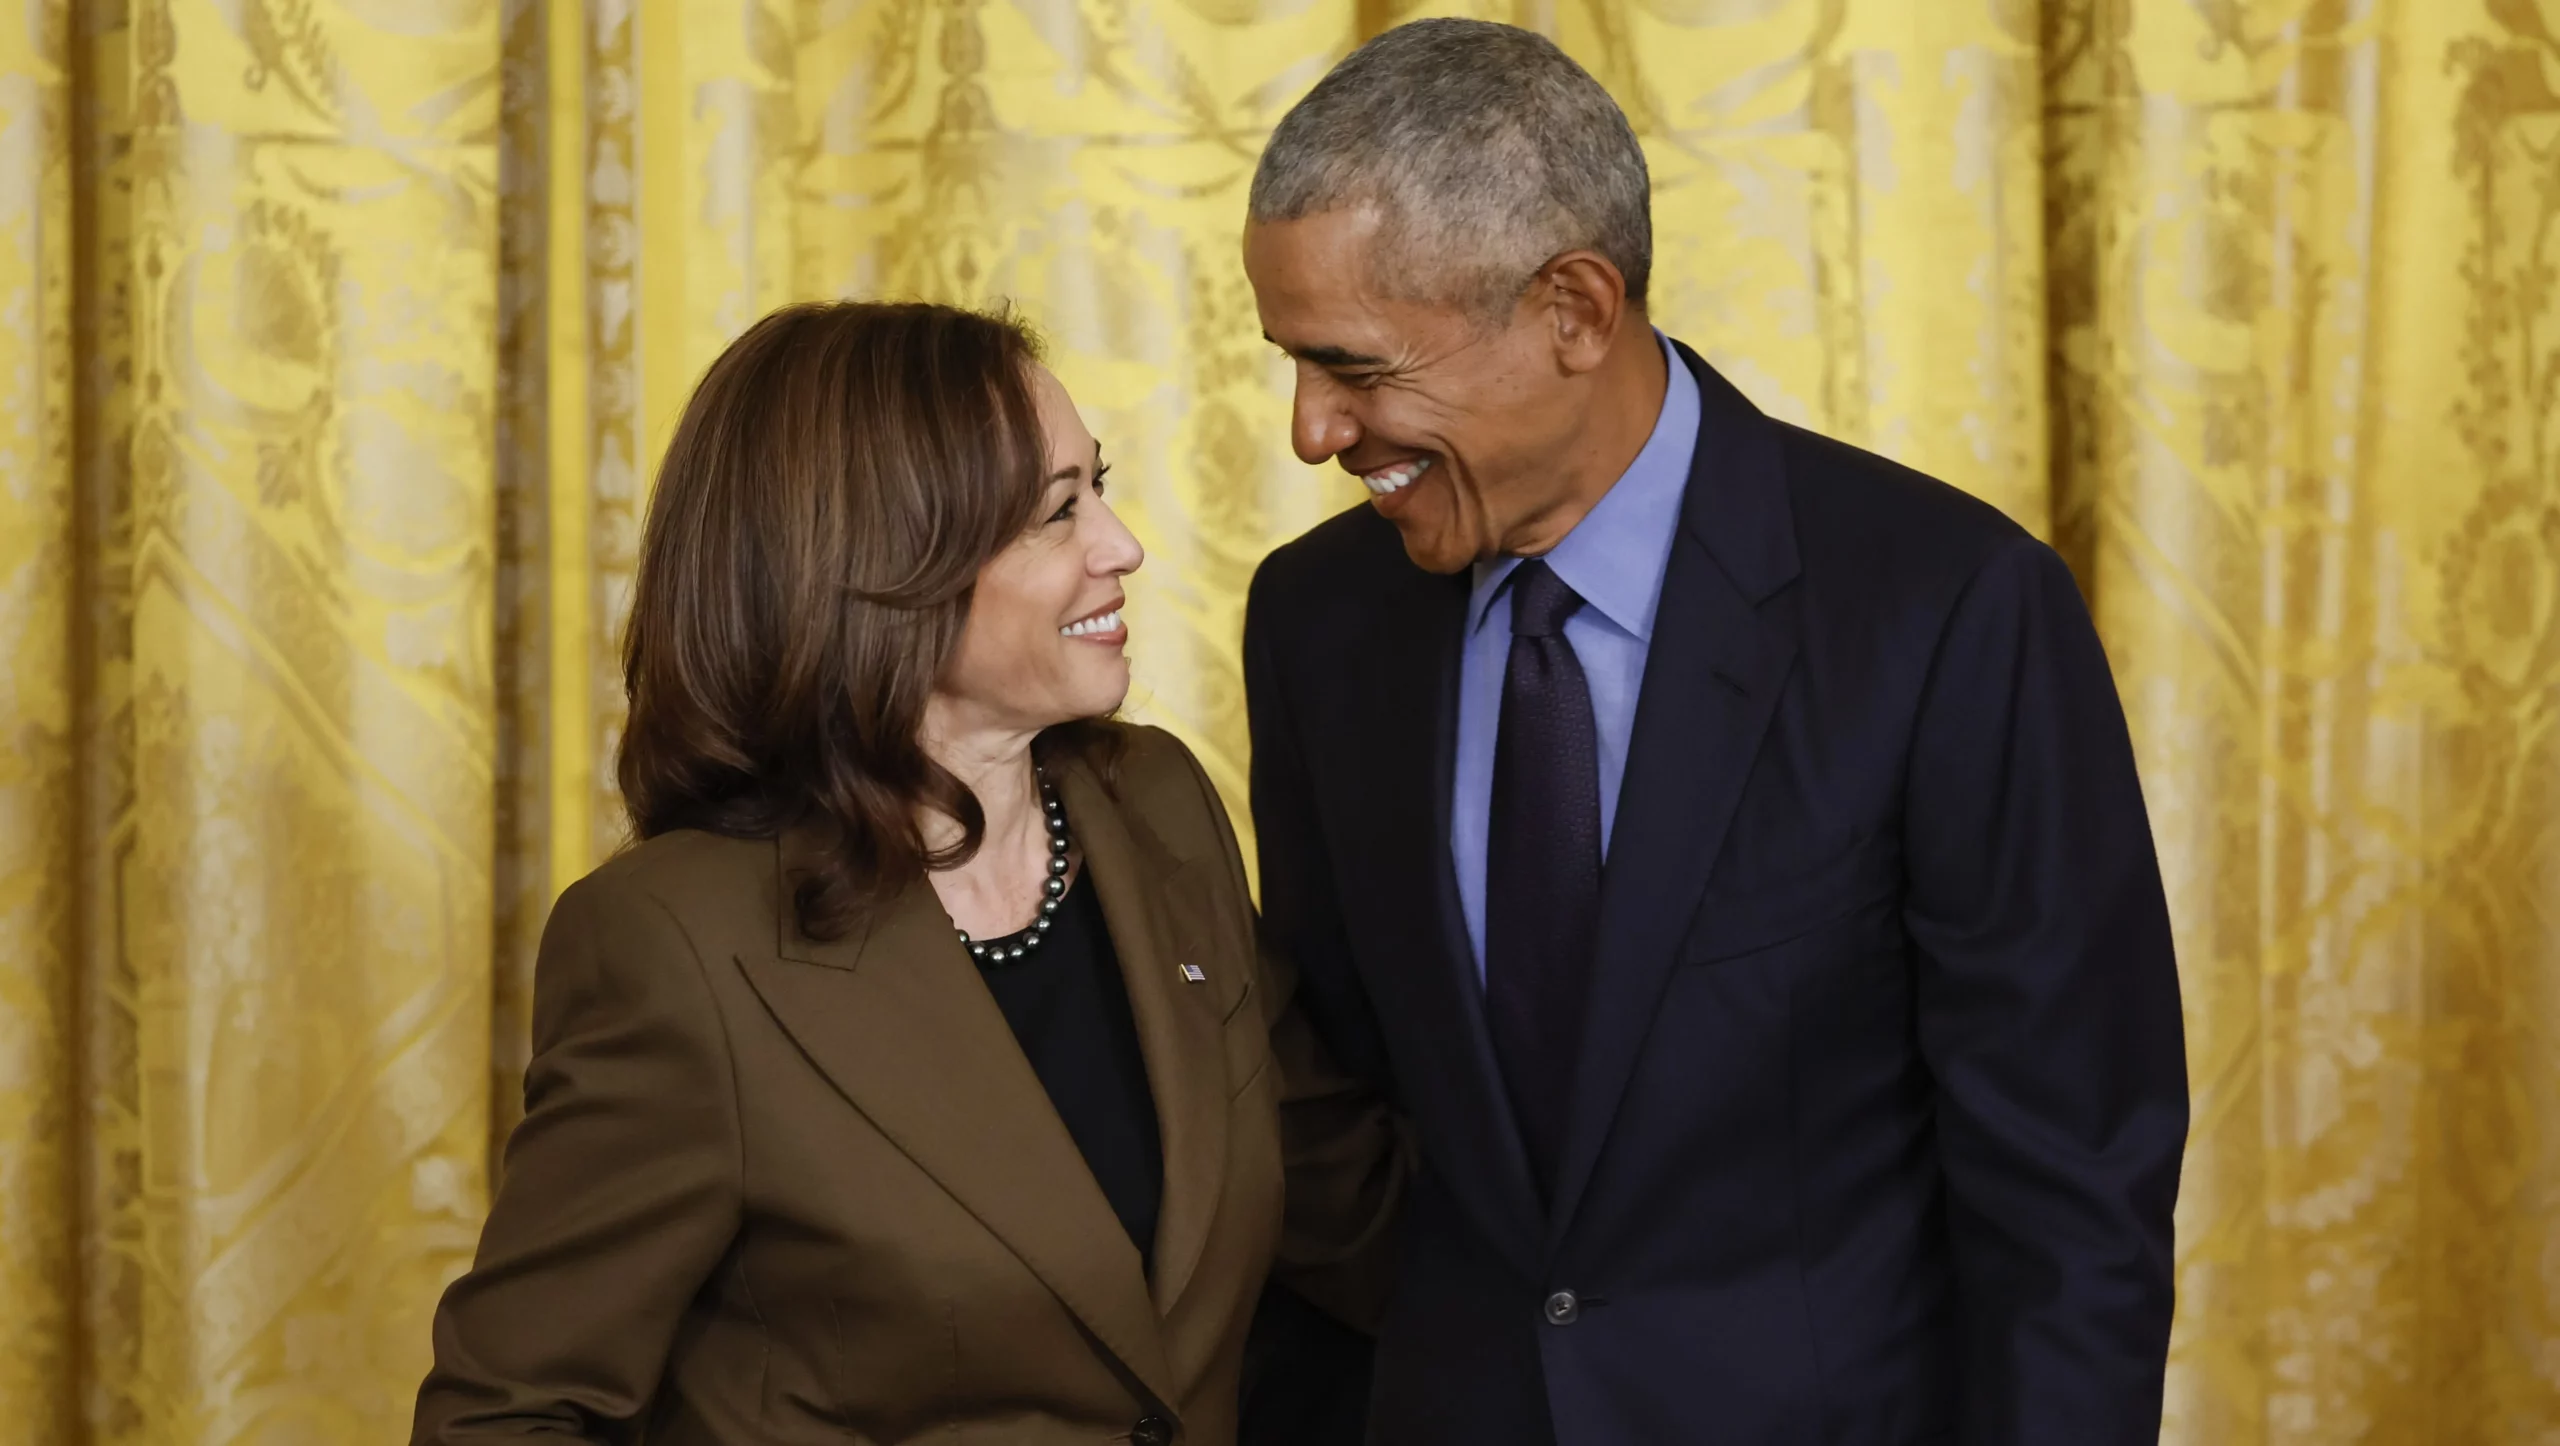 Barack and Michelle Obama show support for Kamala Harris in Hollywood Life endorsement.